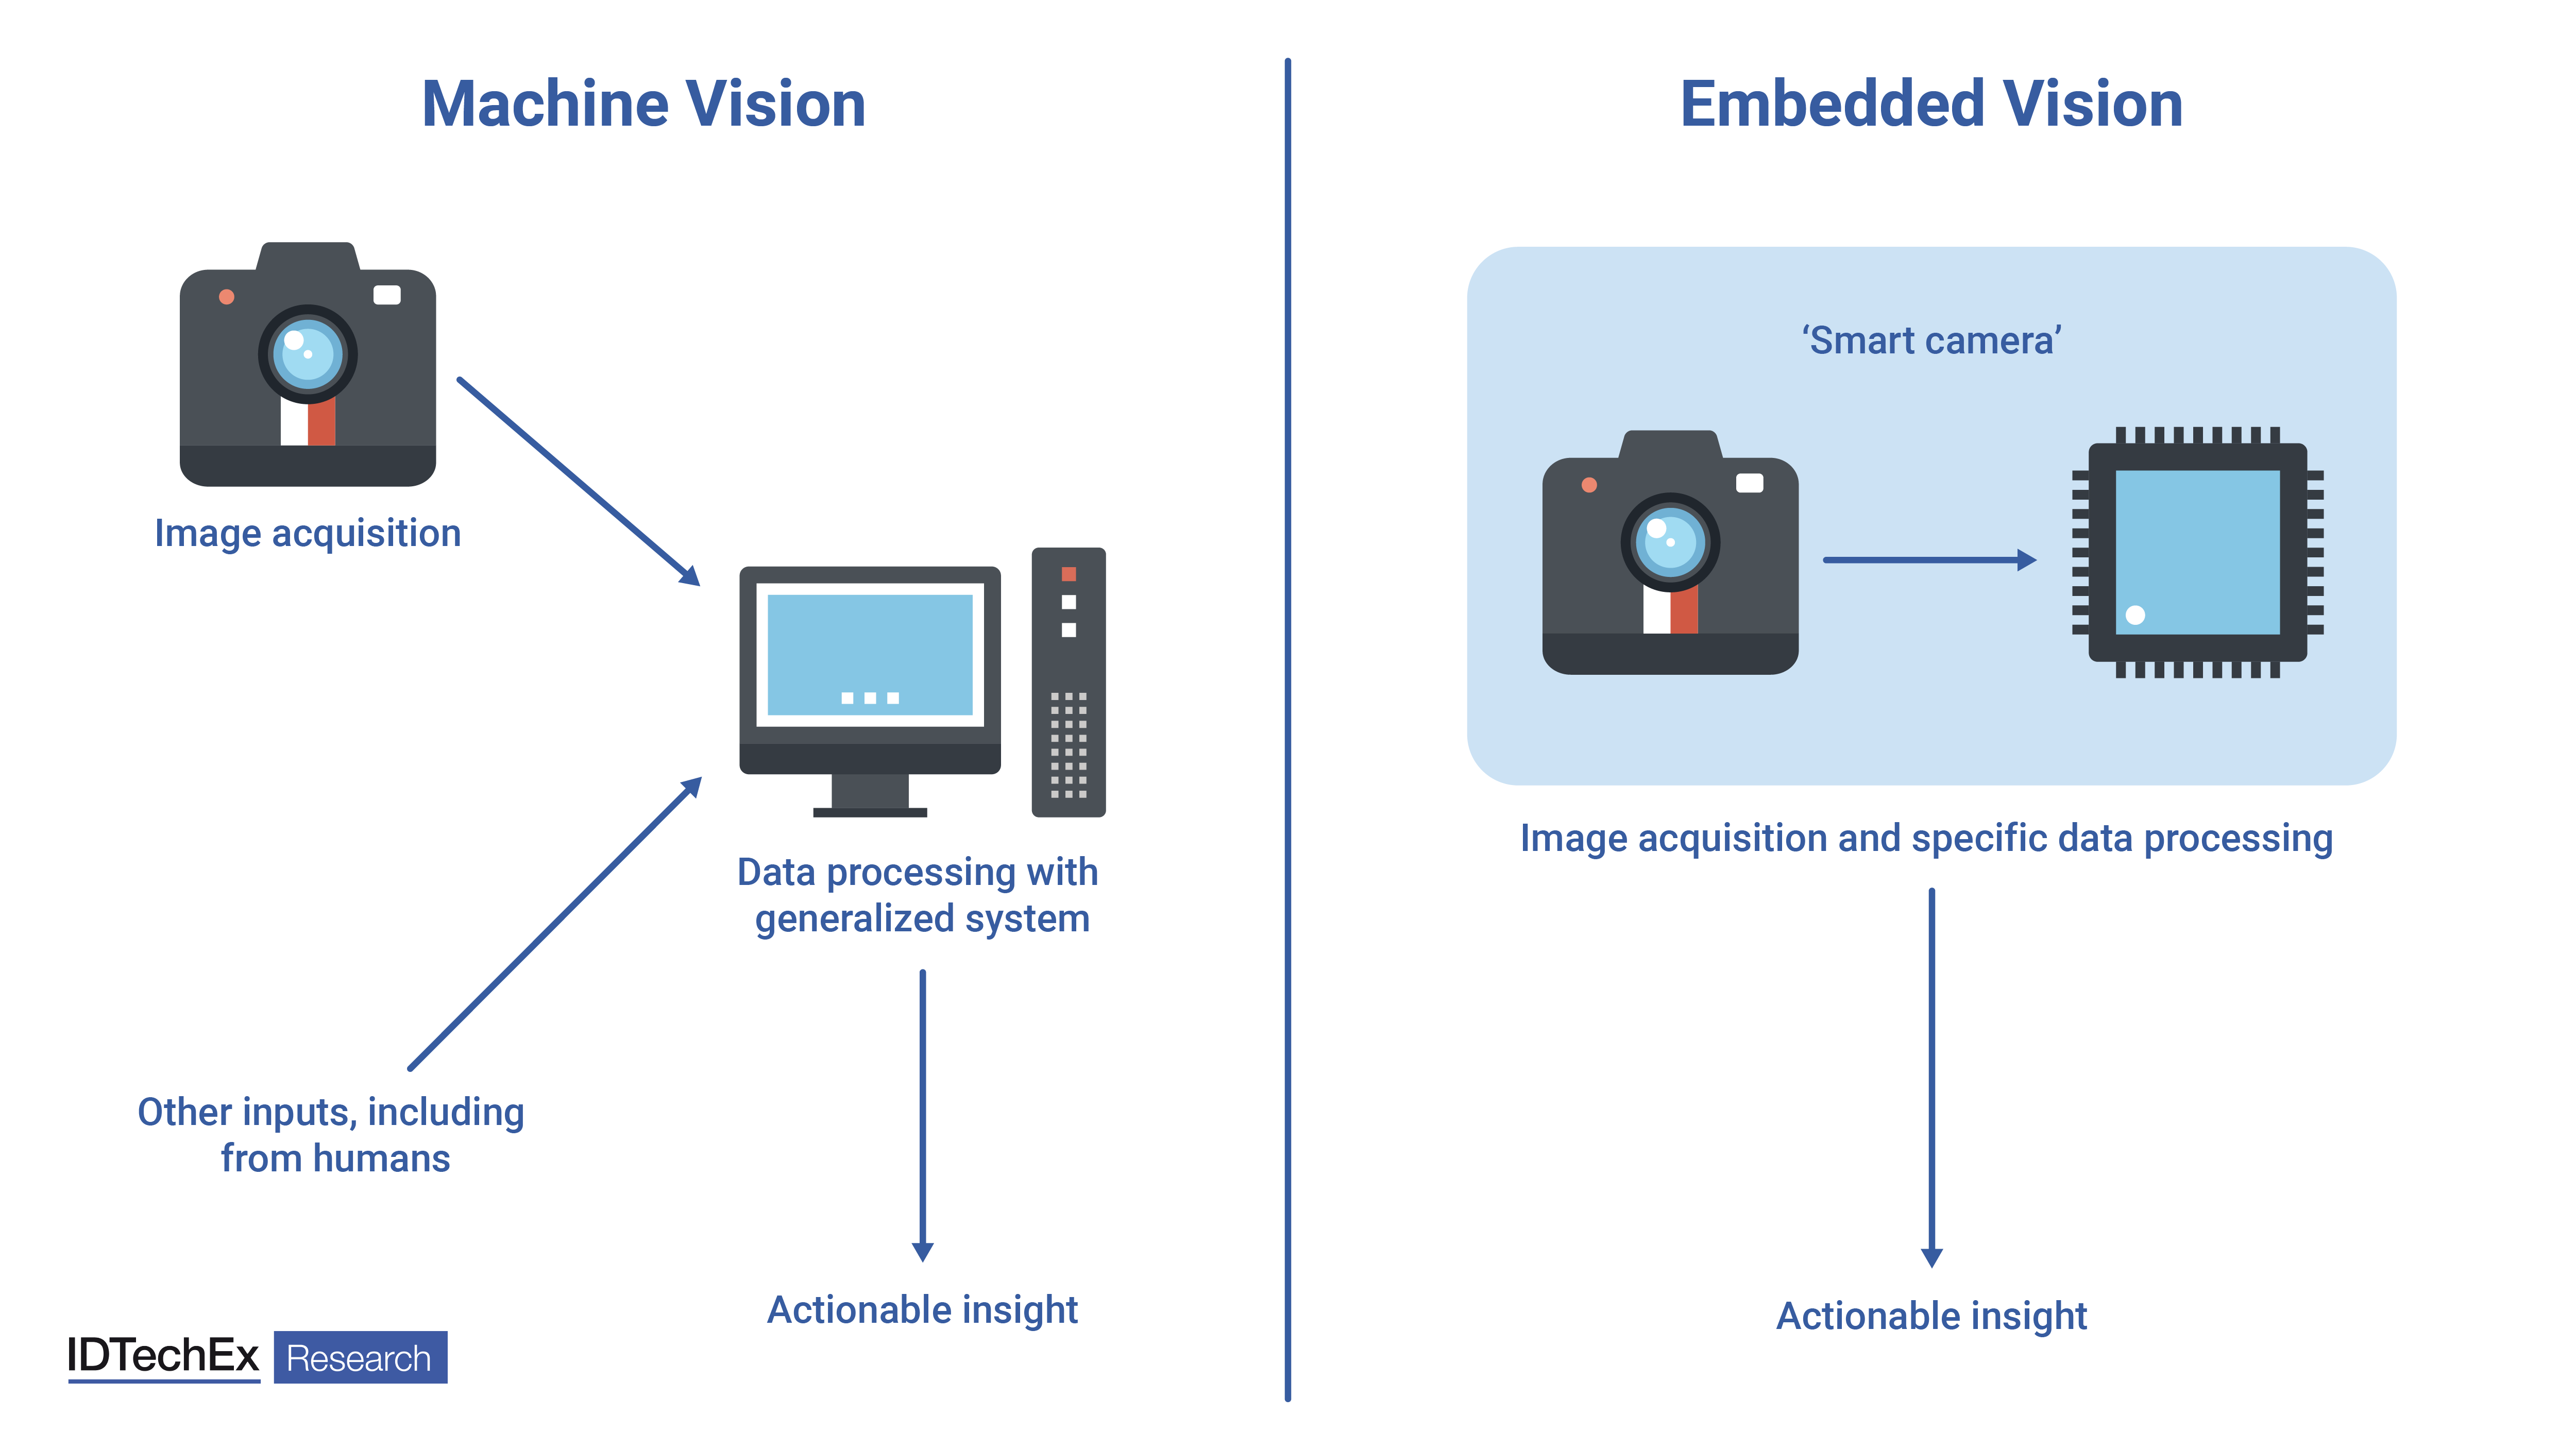 Comparing embedded and machine vision. Source: IDTechEx